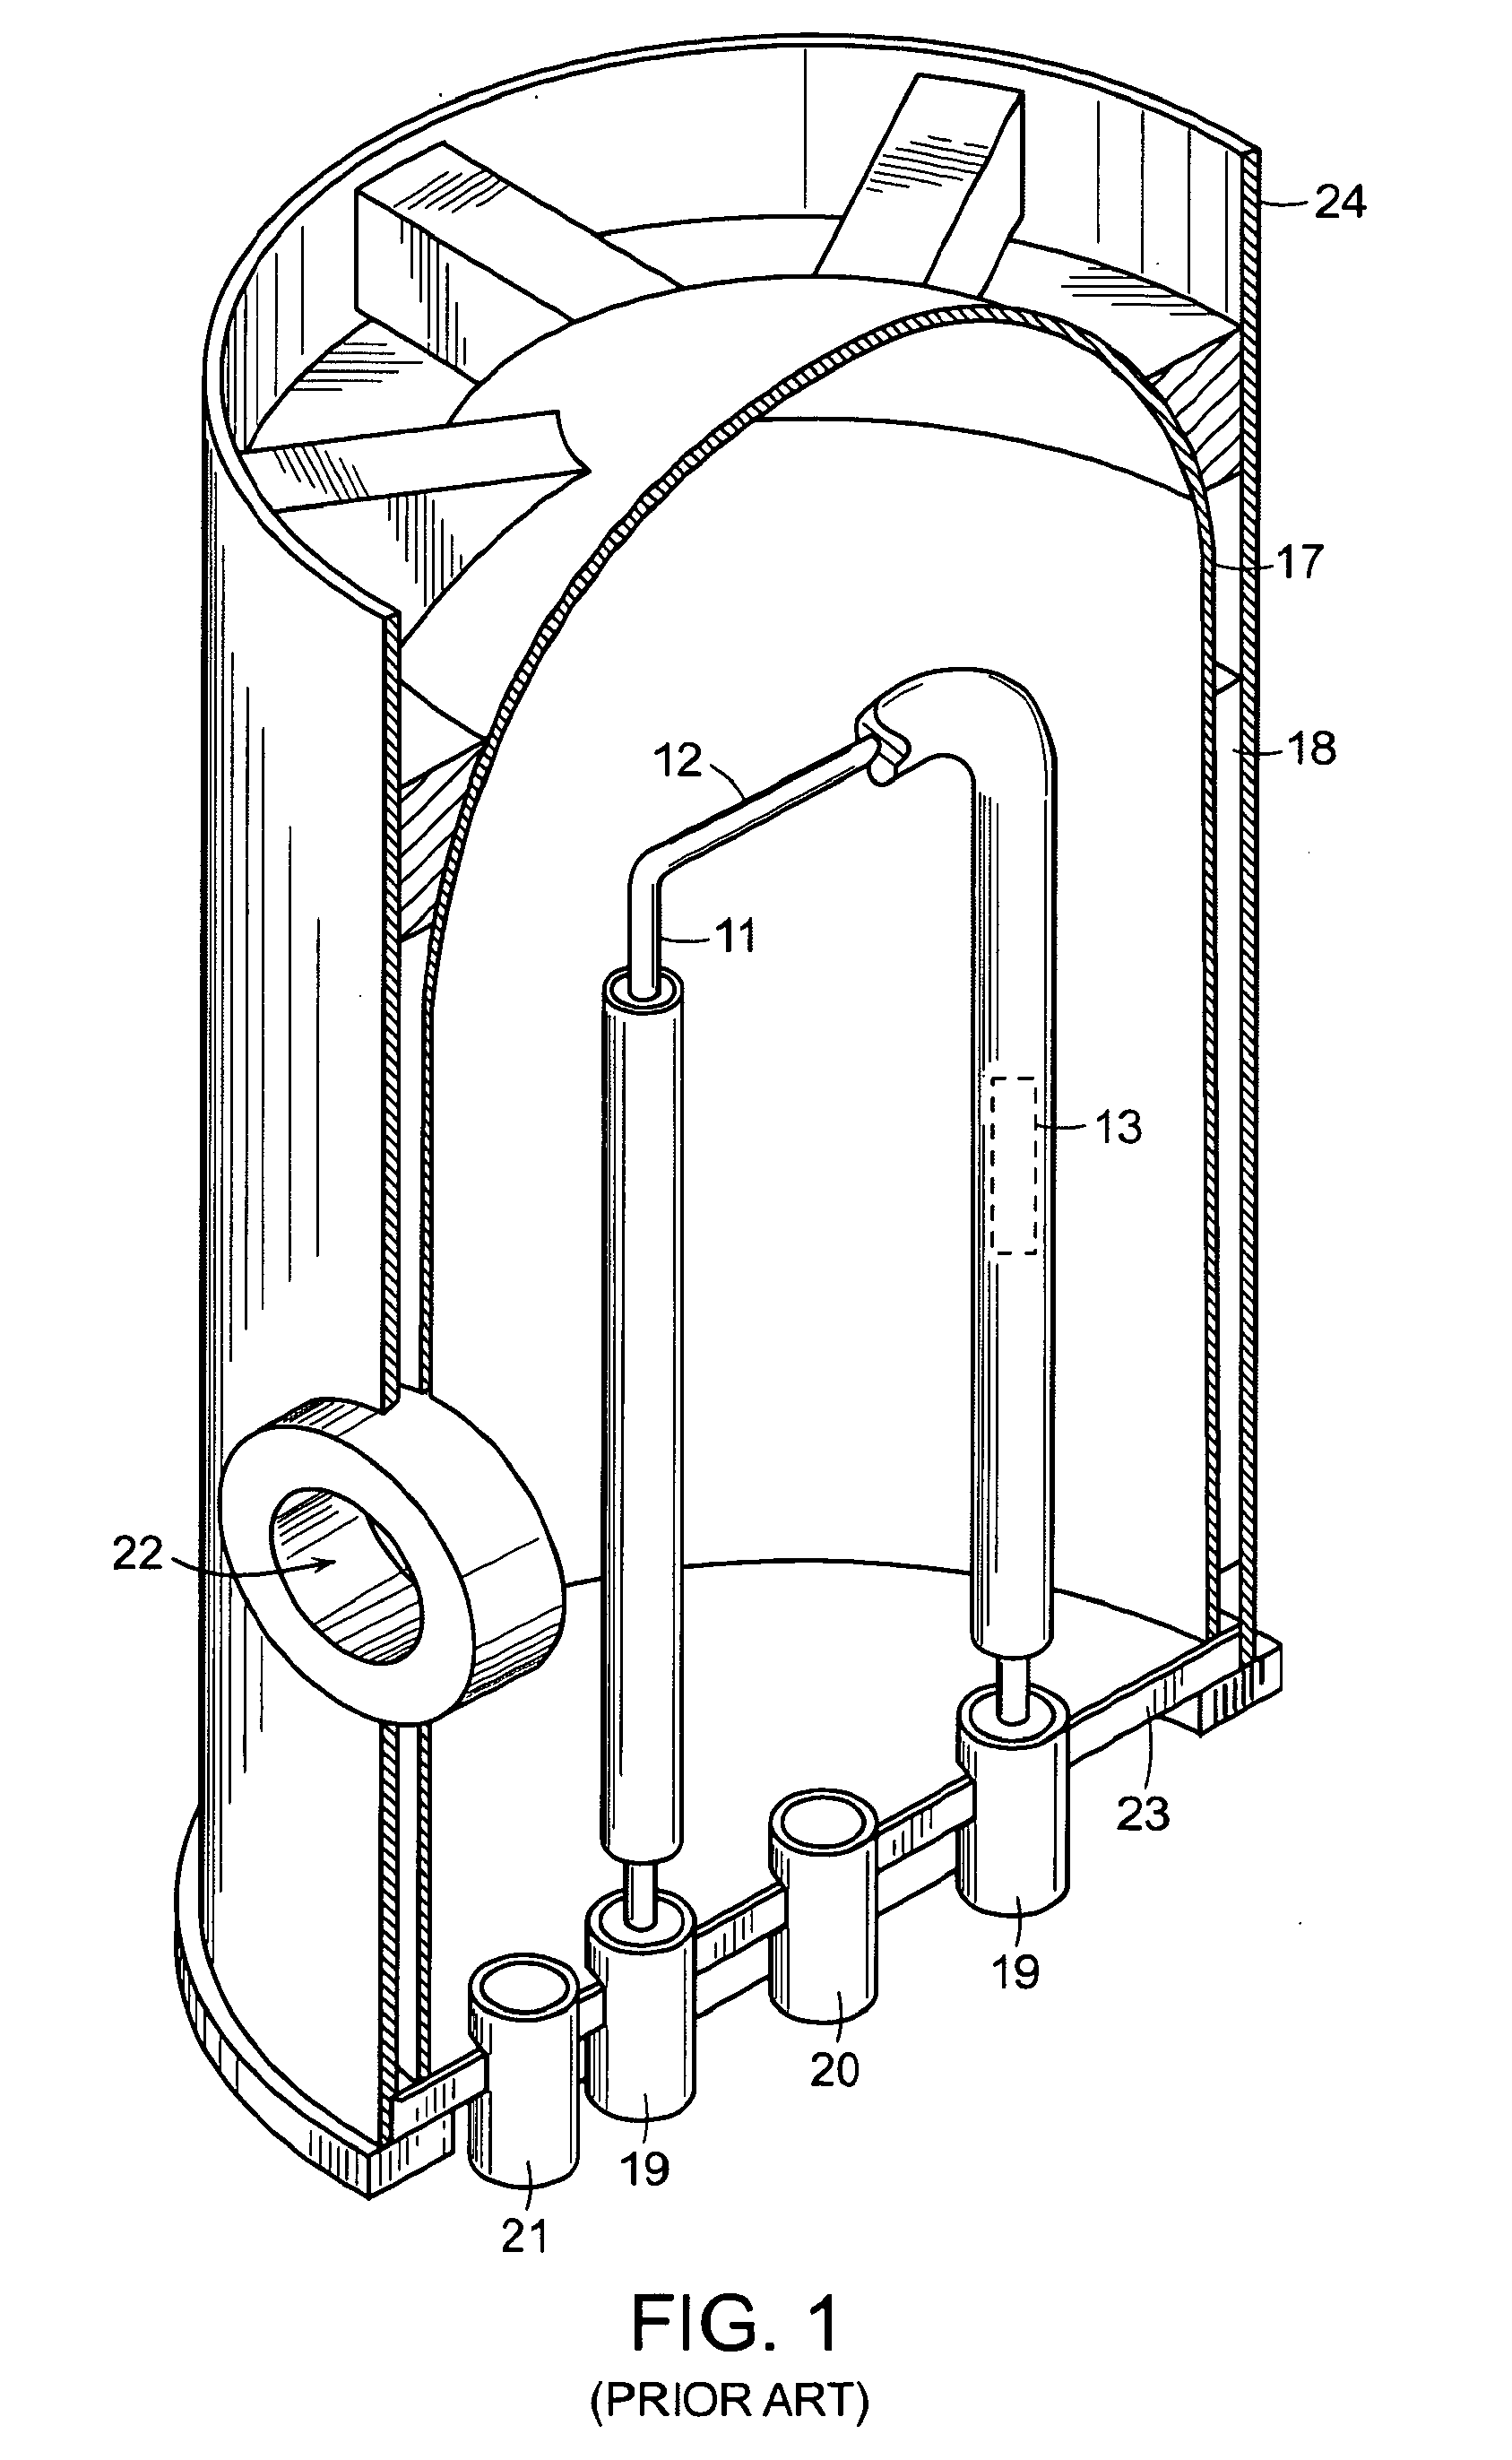 Chuck and bridge connection points for tube filaments in a chemical vapor deposition reactor